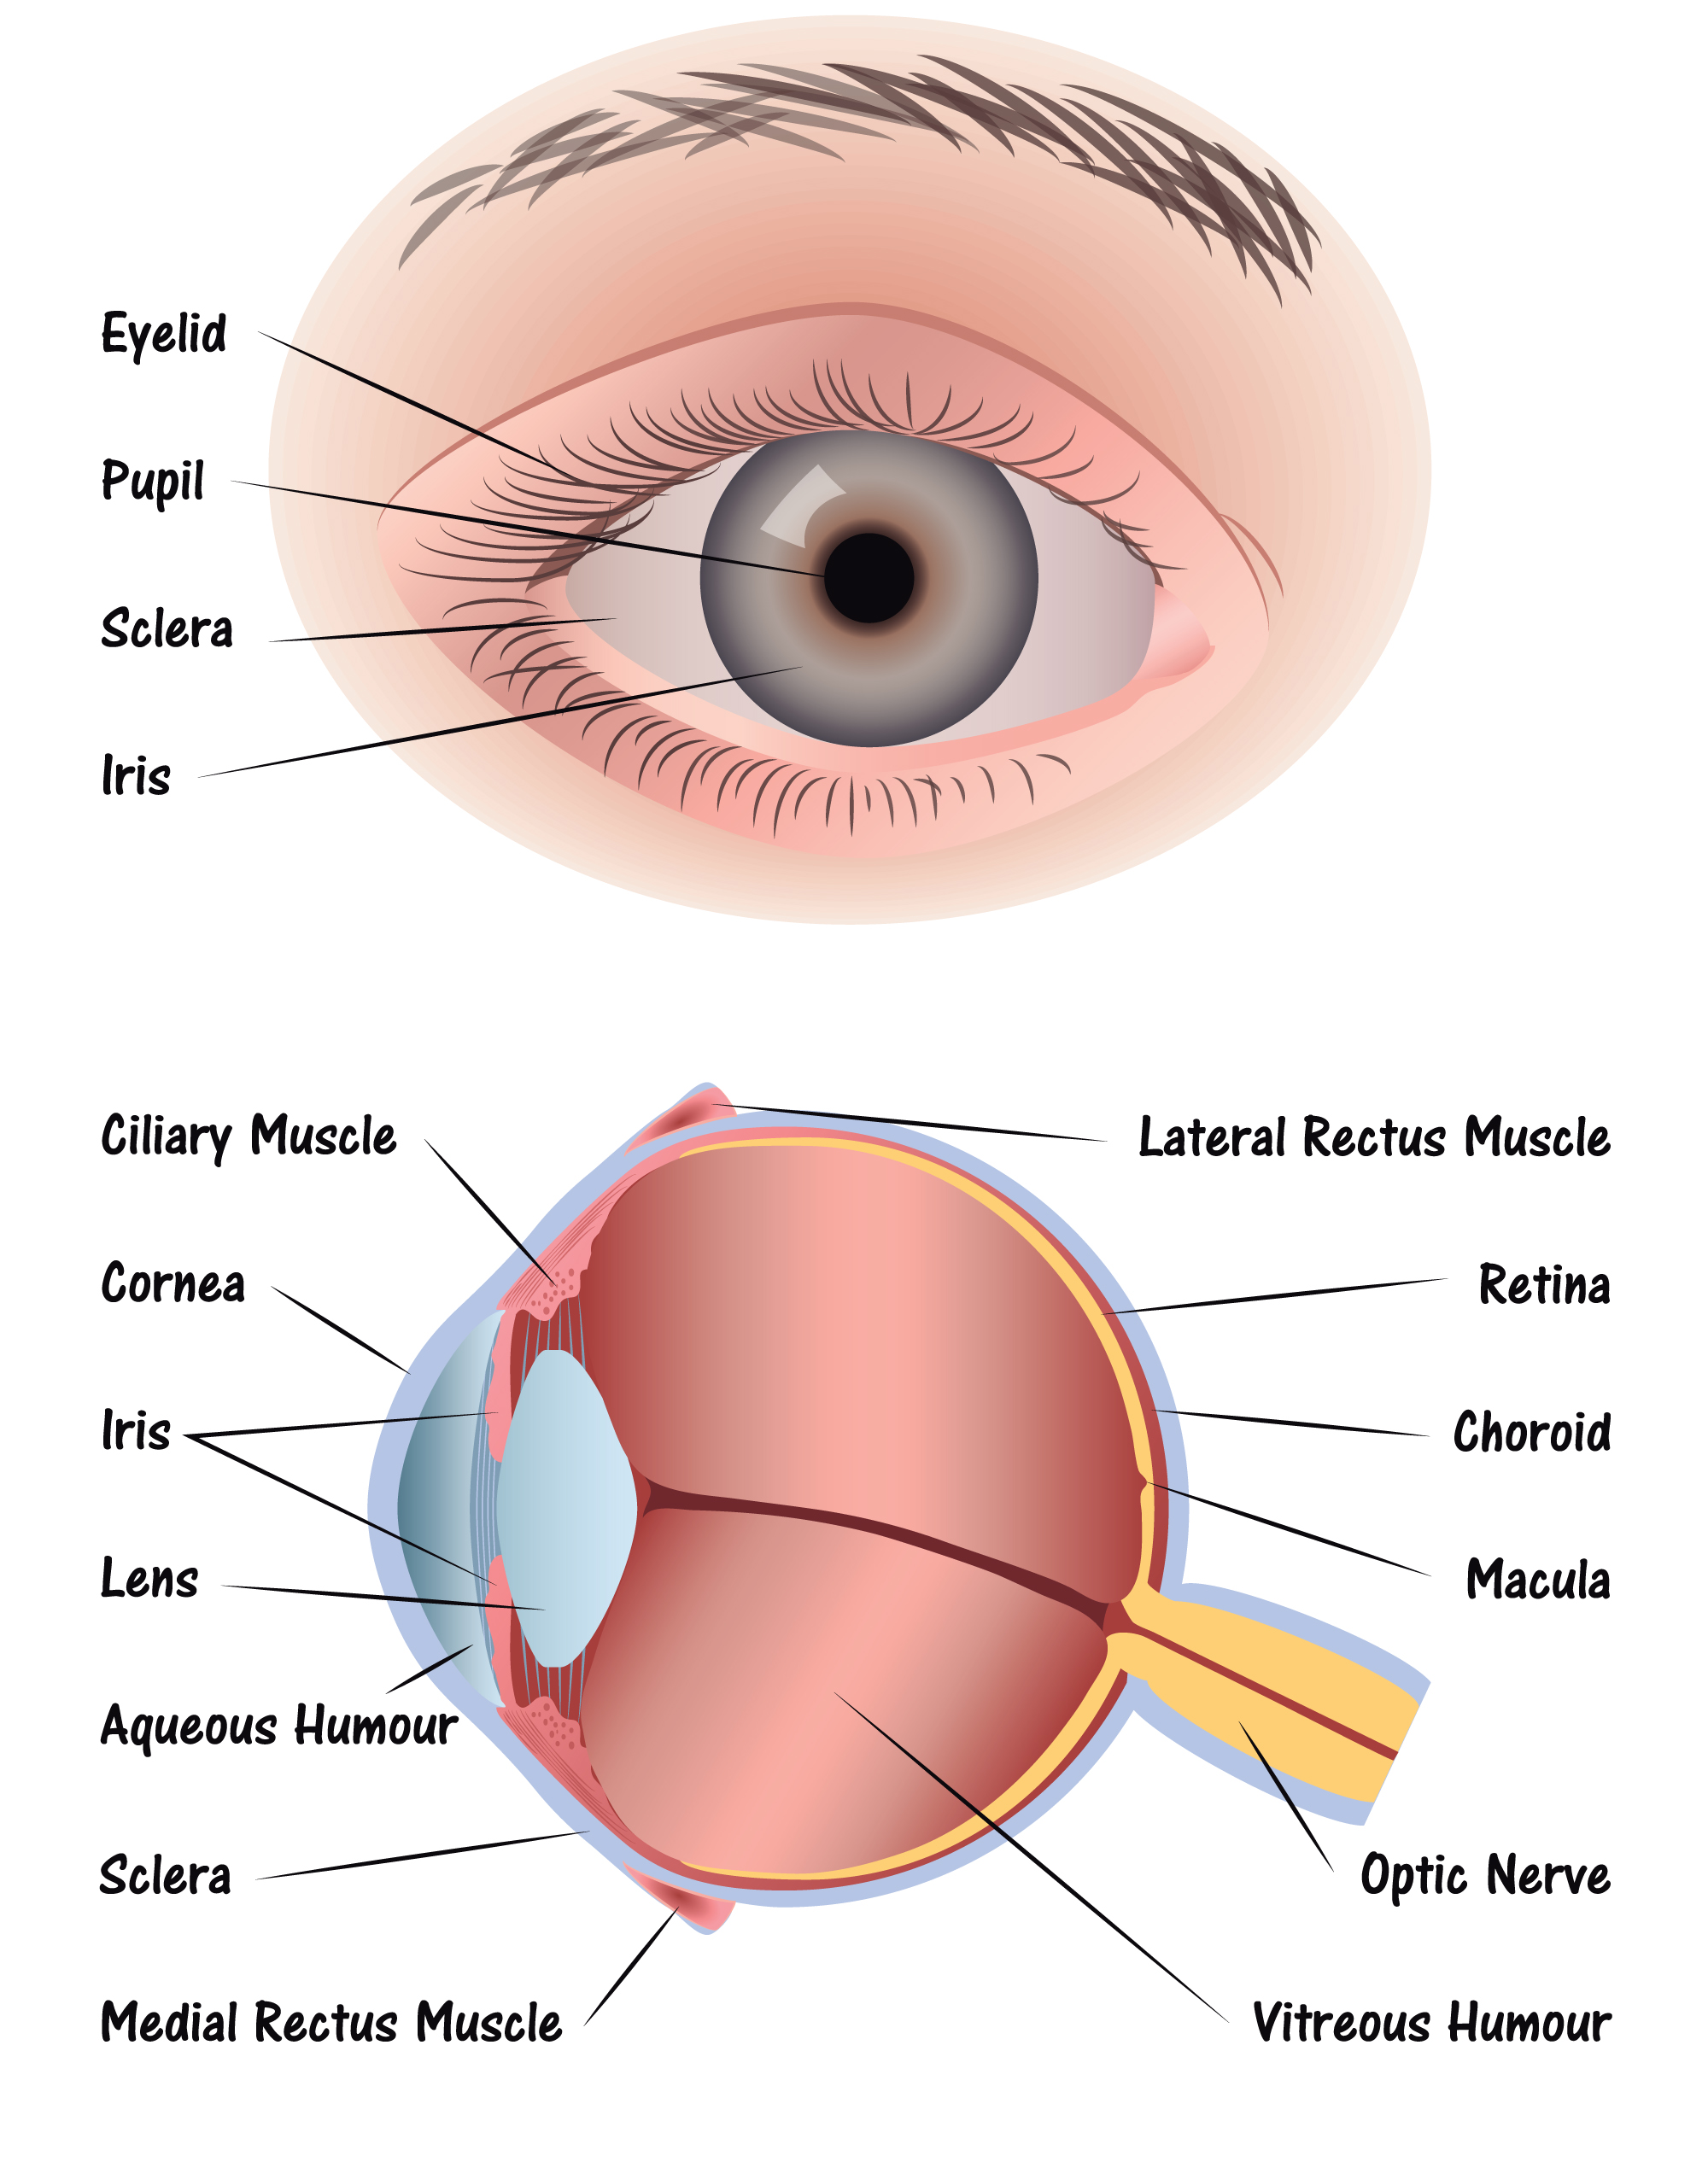 eye structure download free